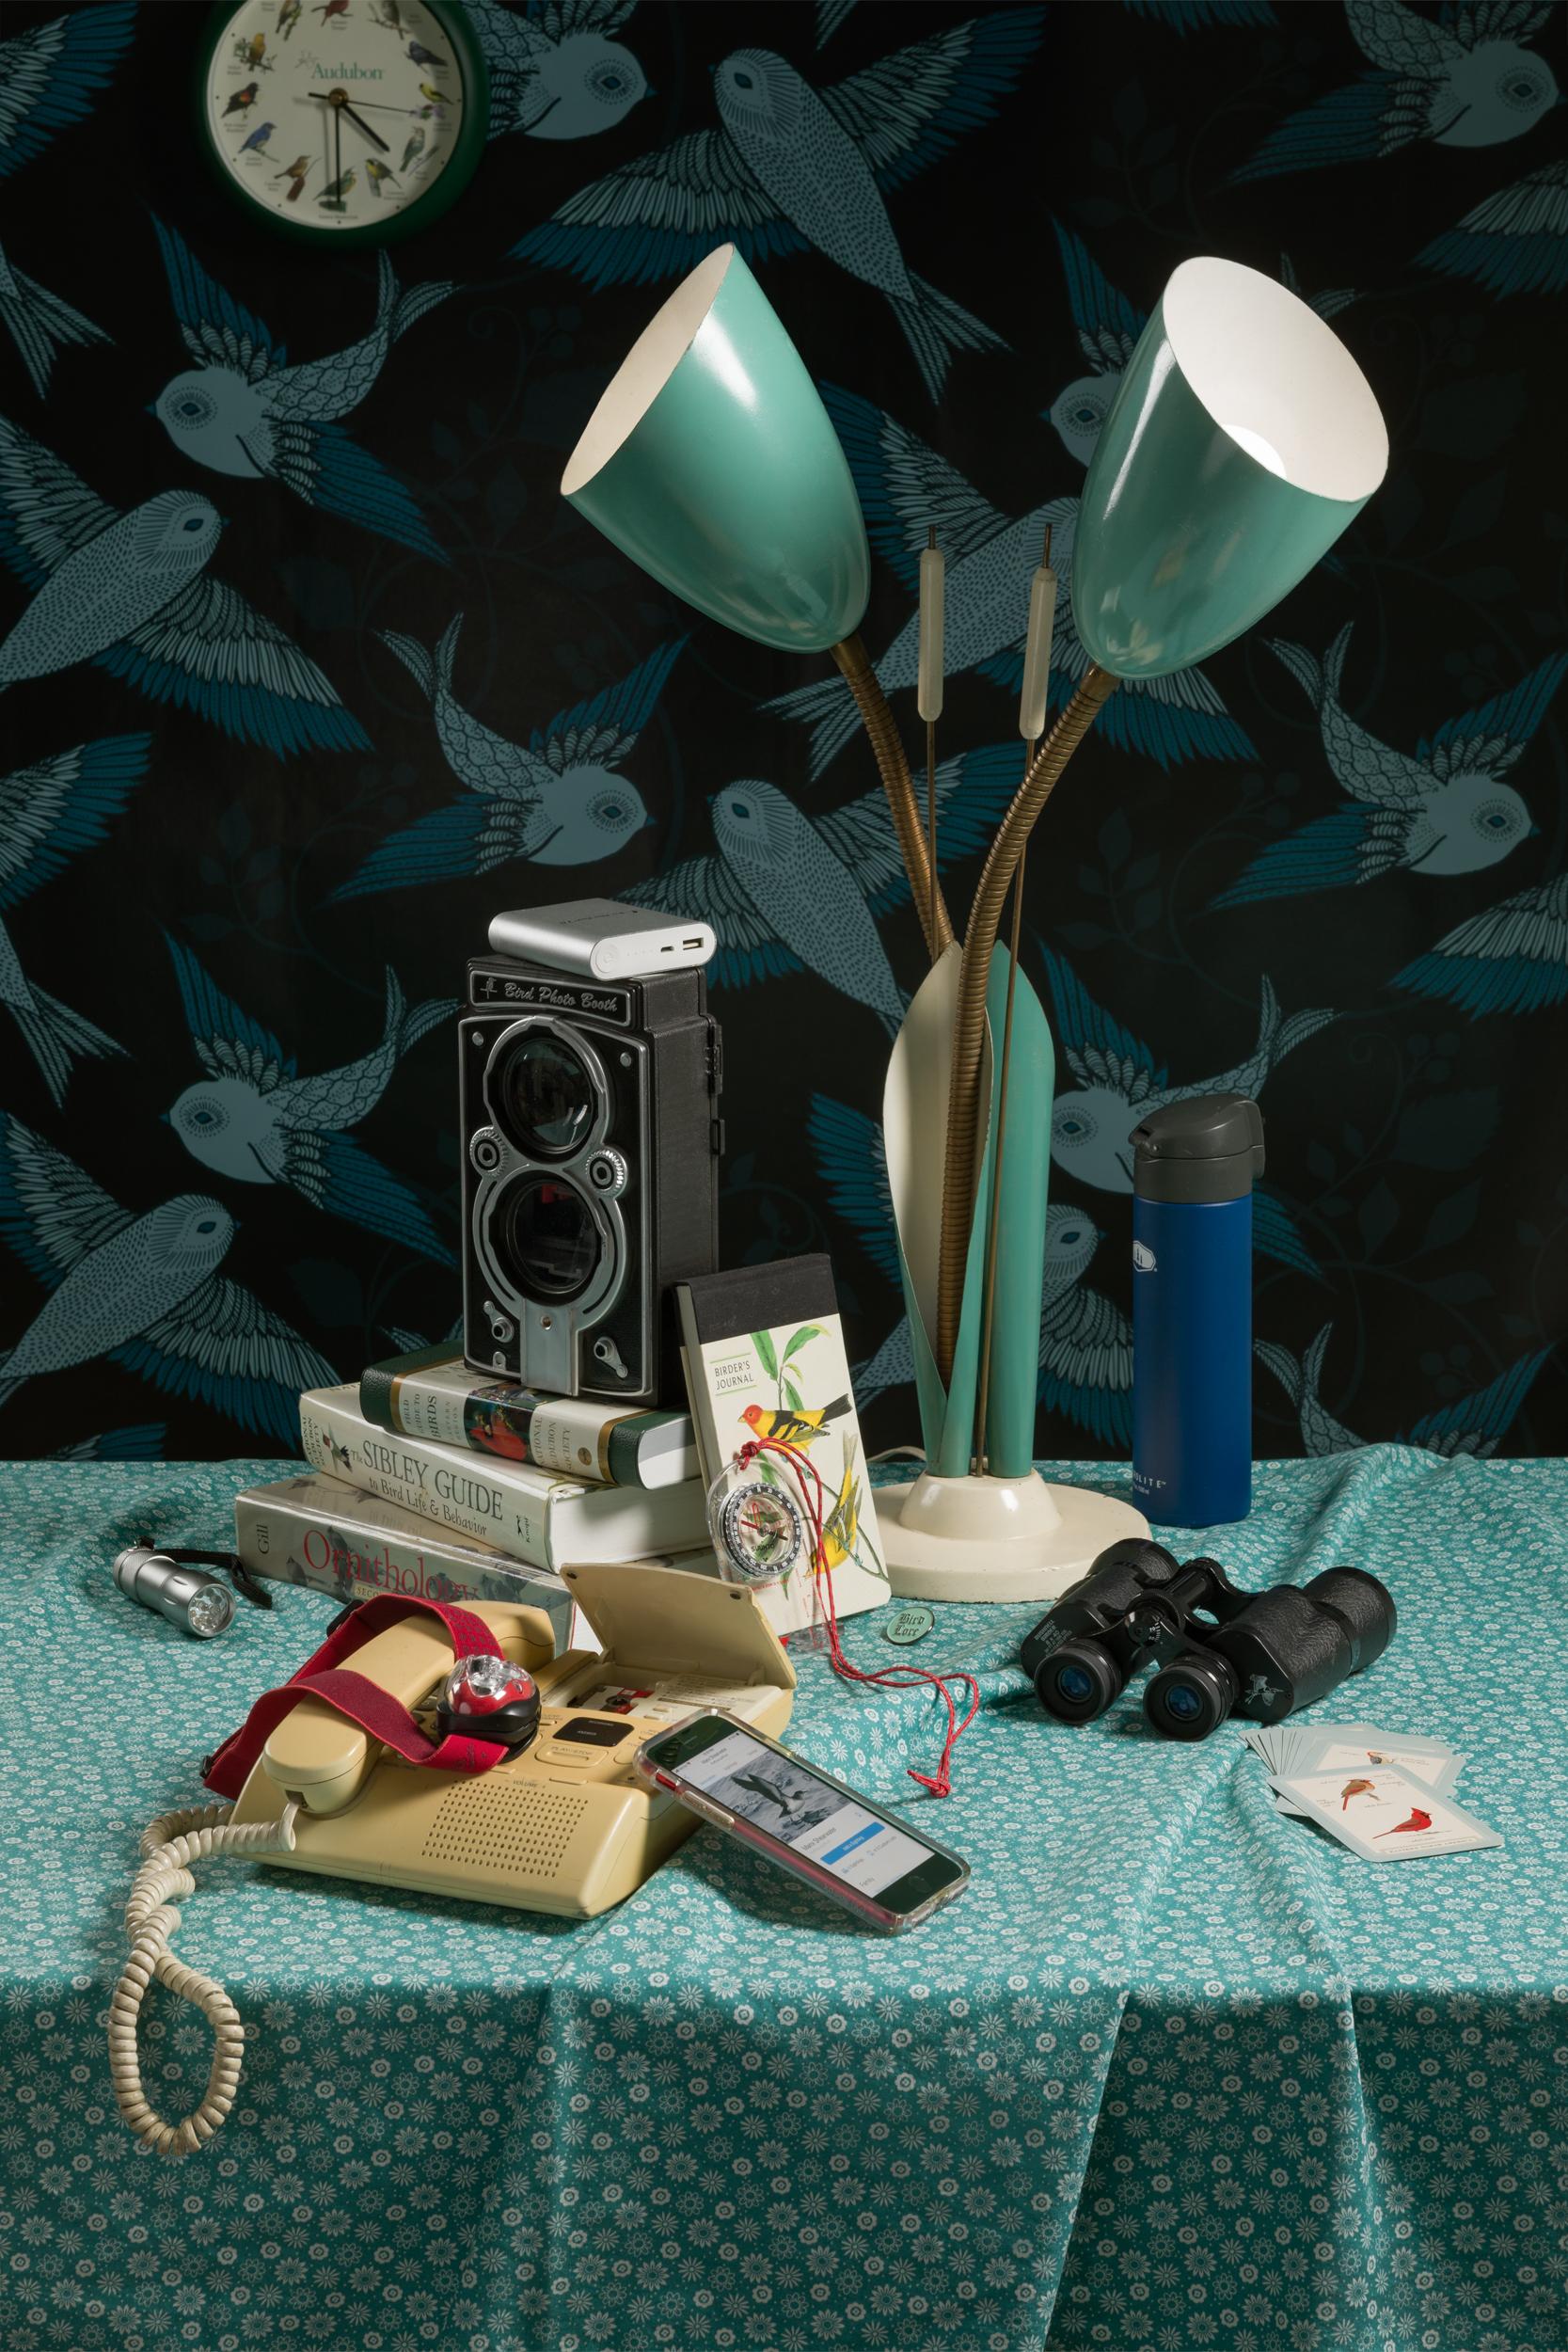 Jeanette May Still-Life Print - “Still Life with Binoculars” Vintage Tech Photograph about Bird Watching